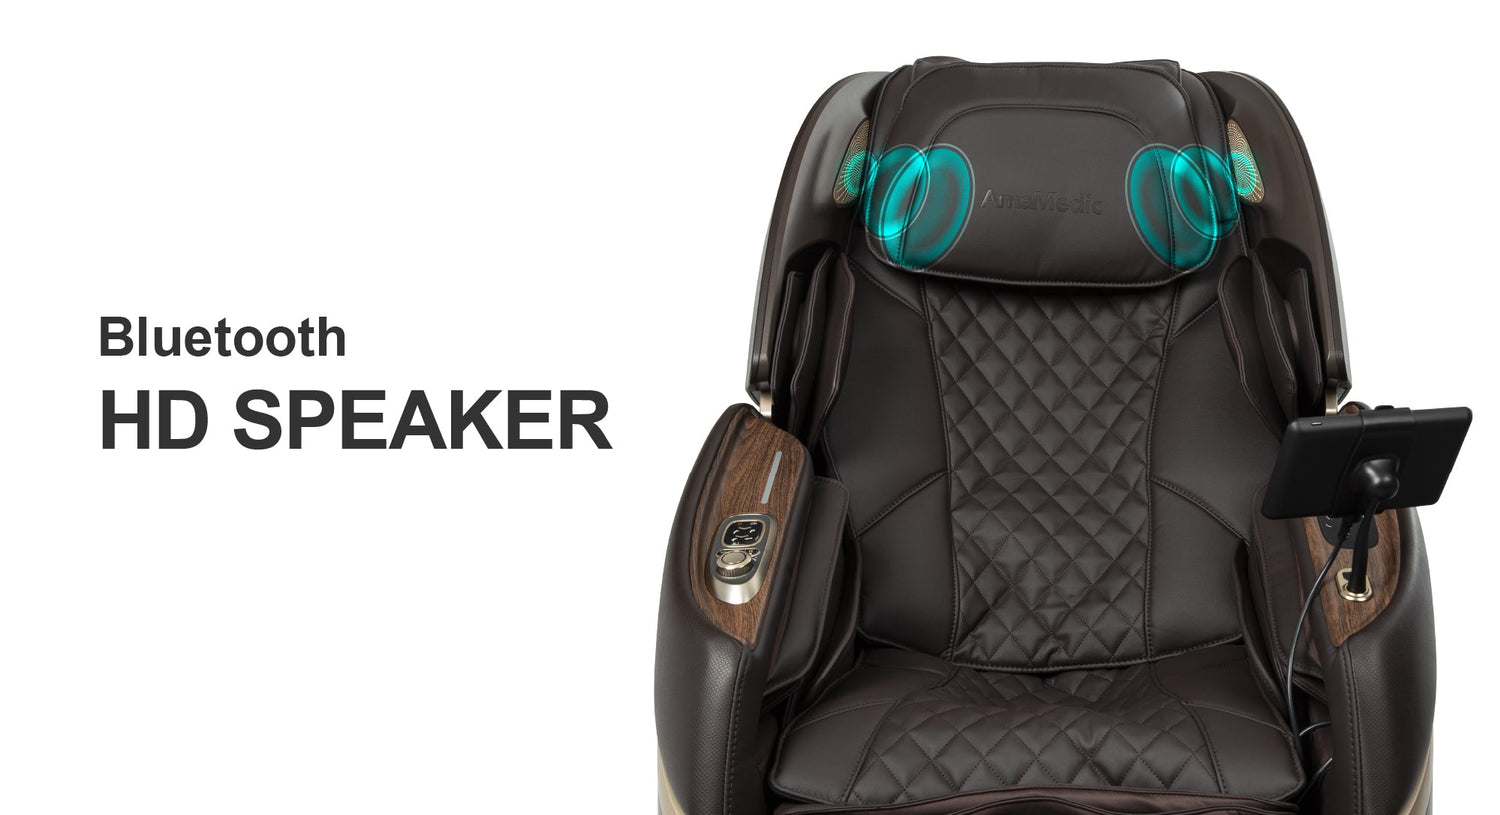 The Amamedic Hilux 4D Massage Chair has built-in Bluetooth HD speakers with amphitheater sound technology that enhances audio quality. 